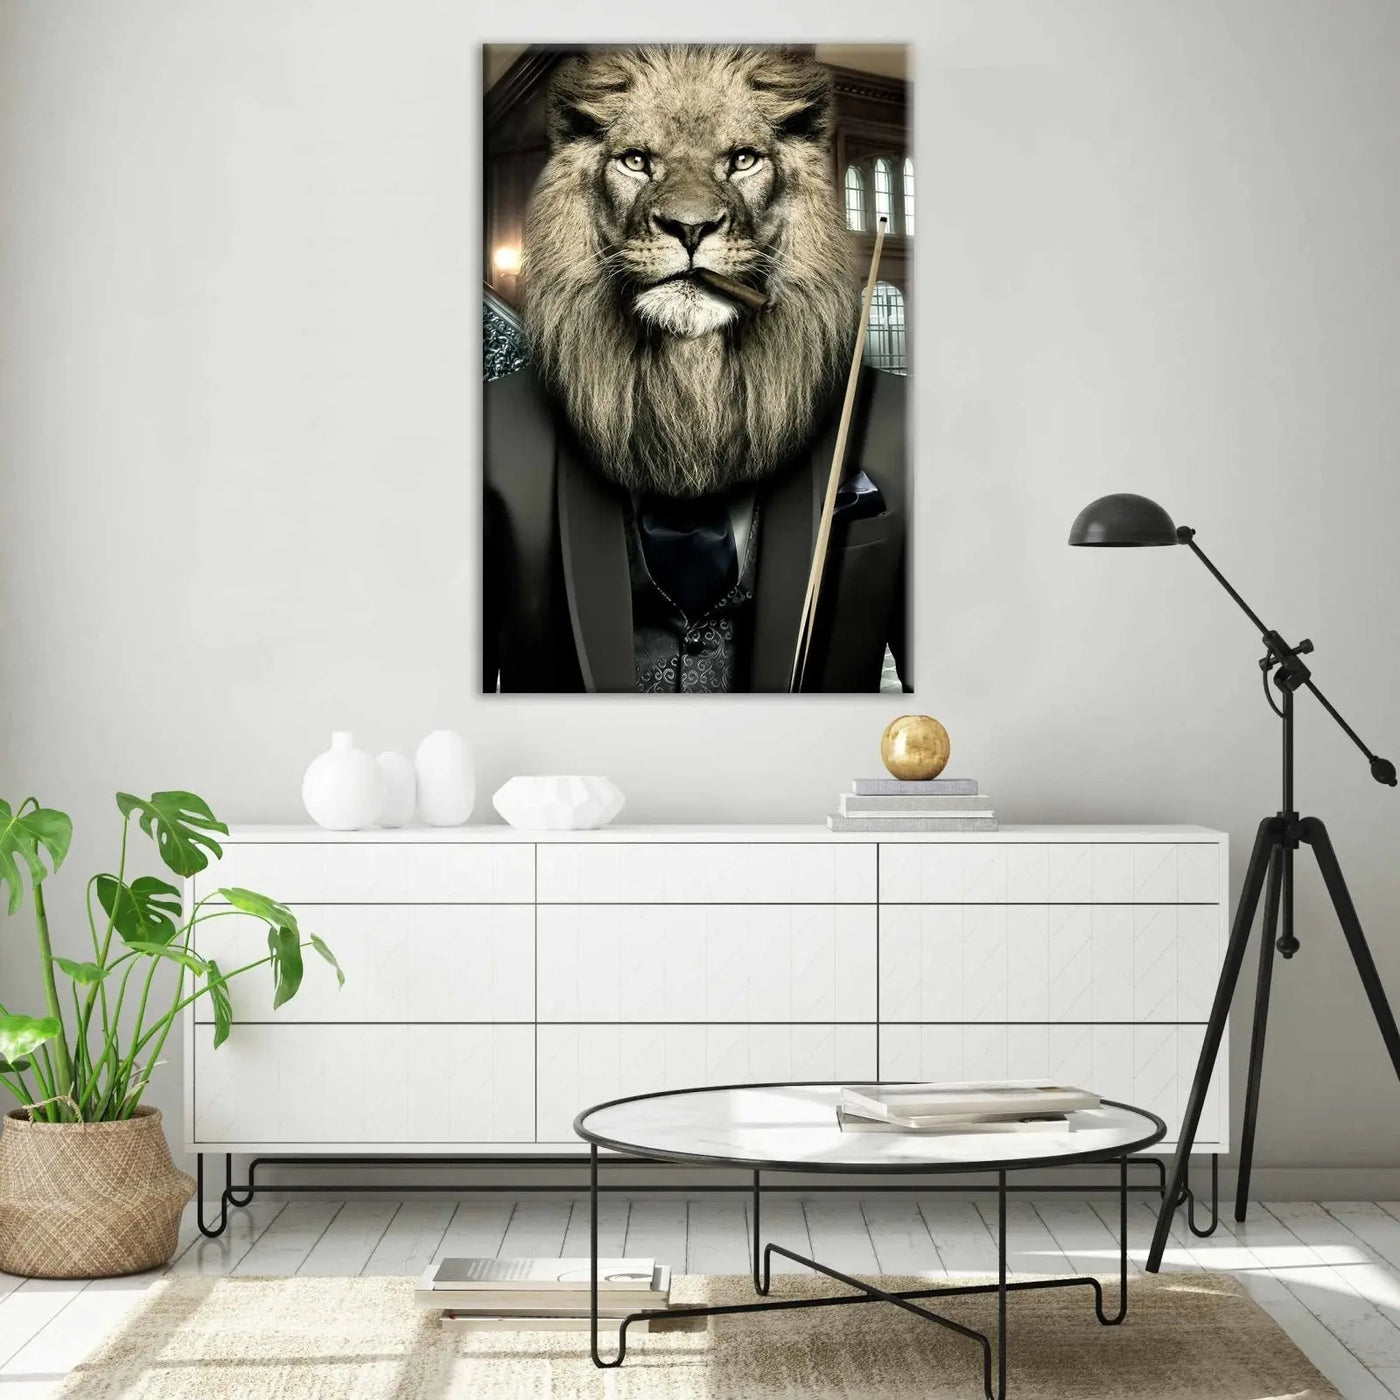 "SUIT LION" - Art For Everyone